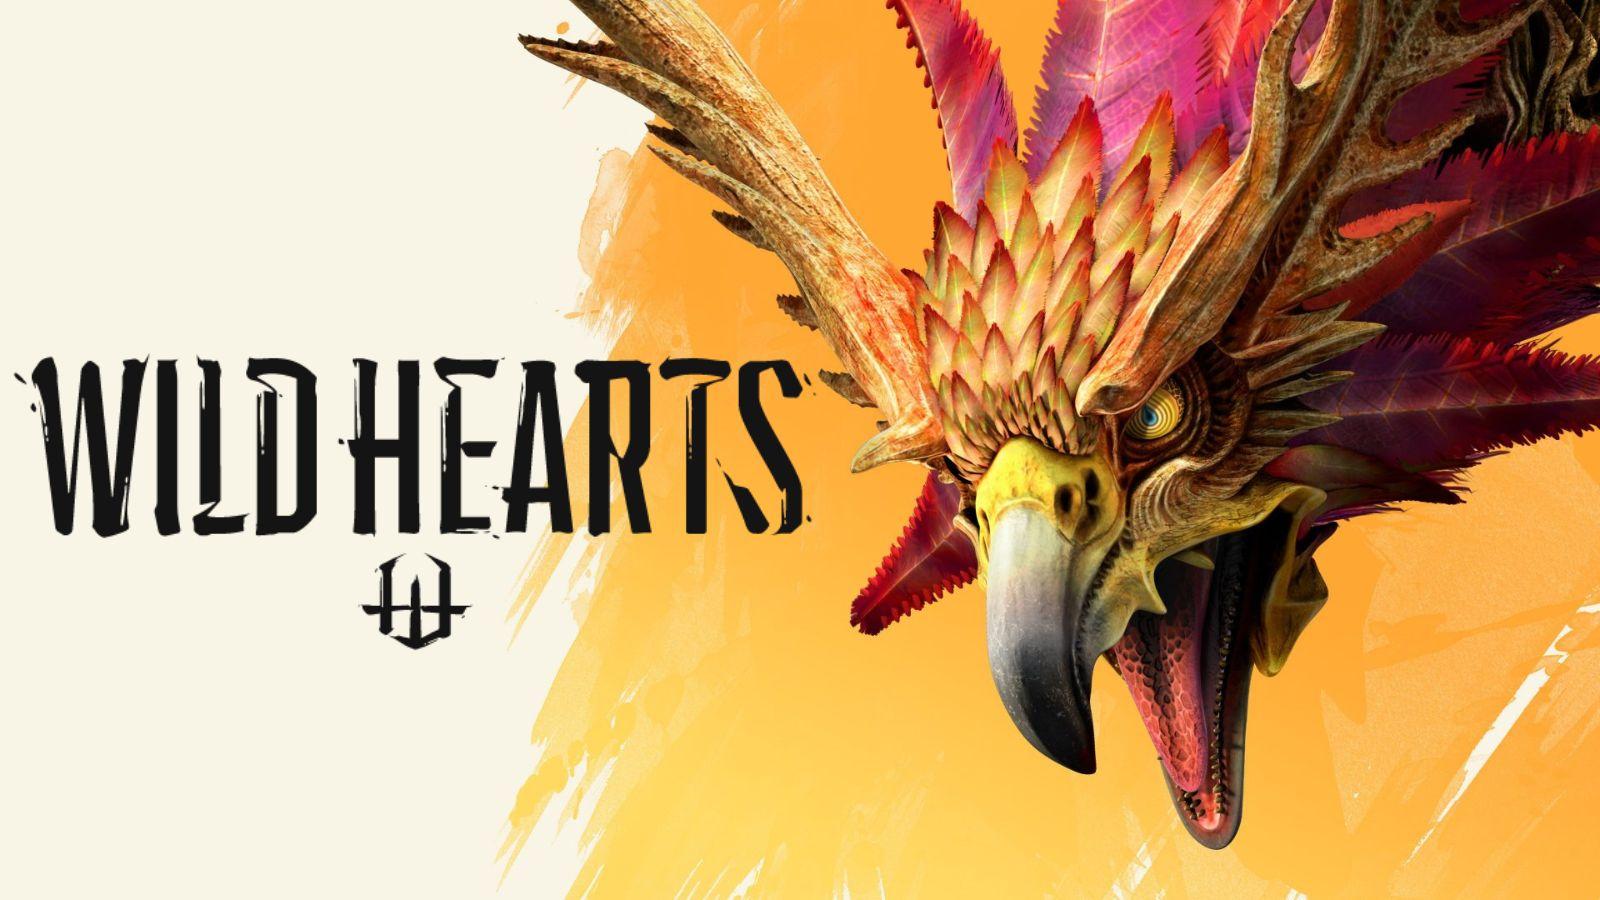 Wild Hearts Review Scores